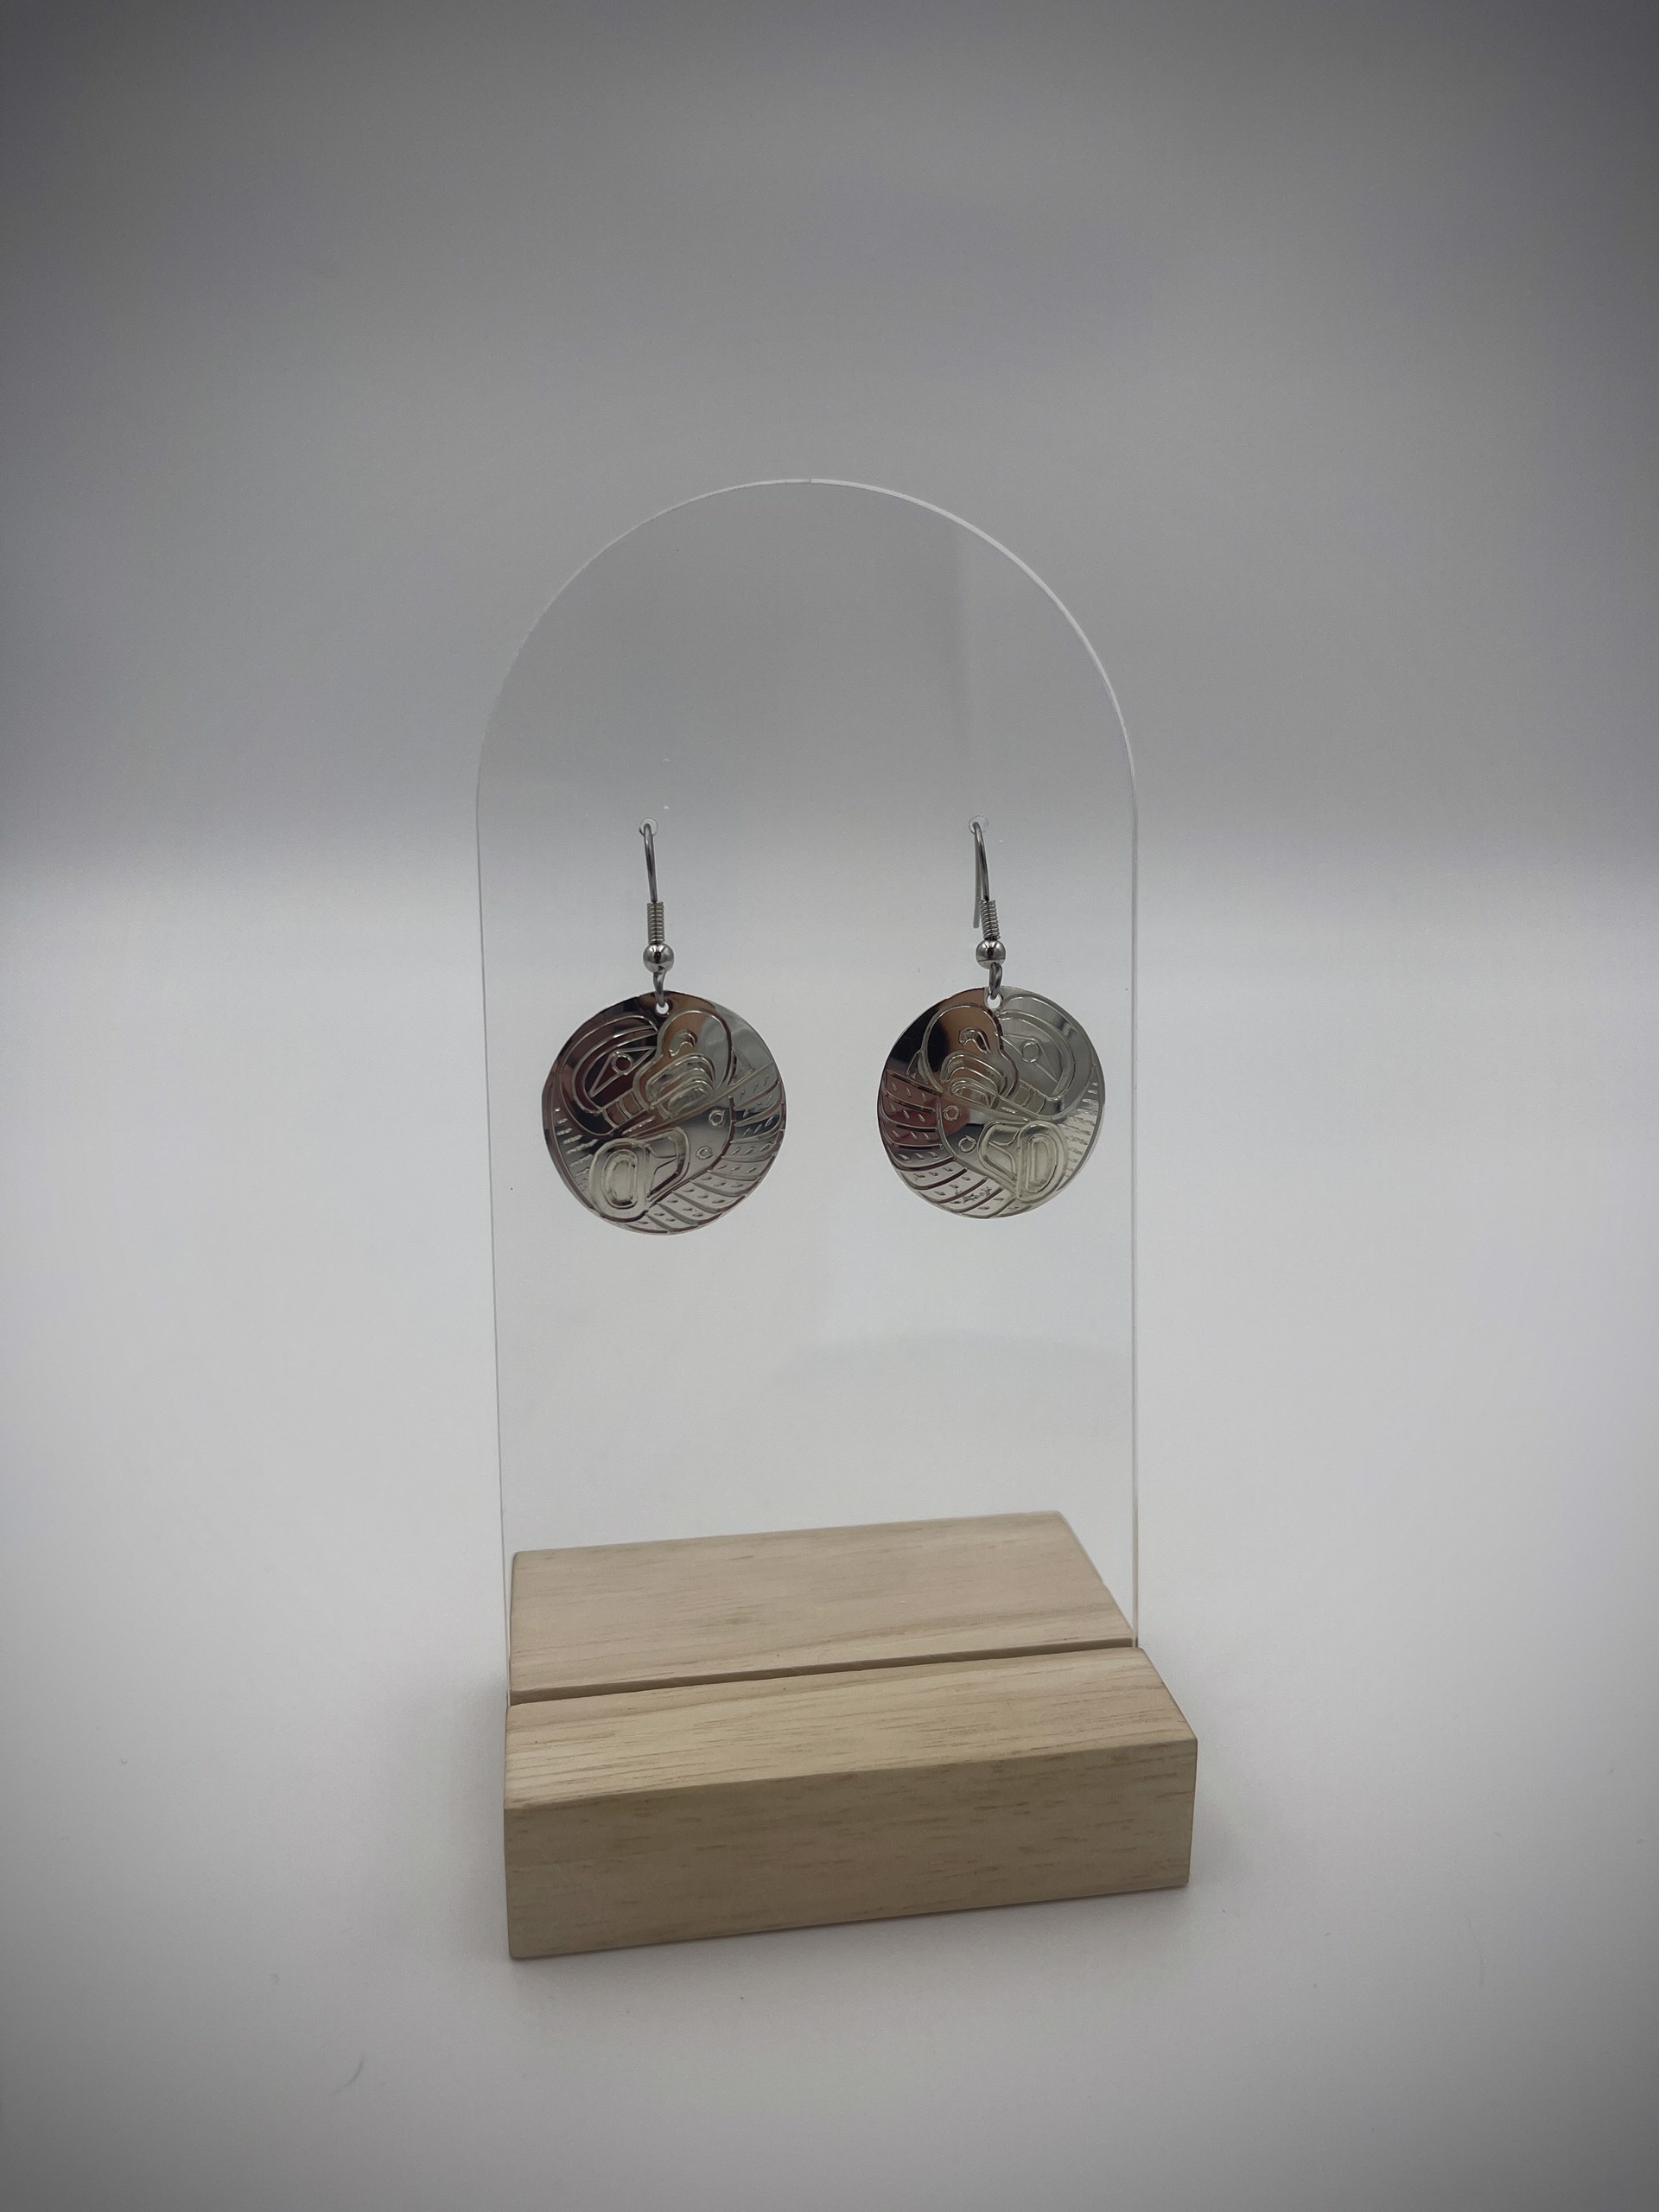 Silver Earrings by William Cook